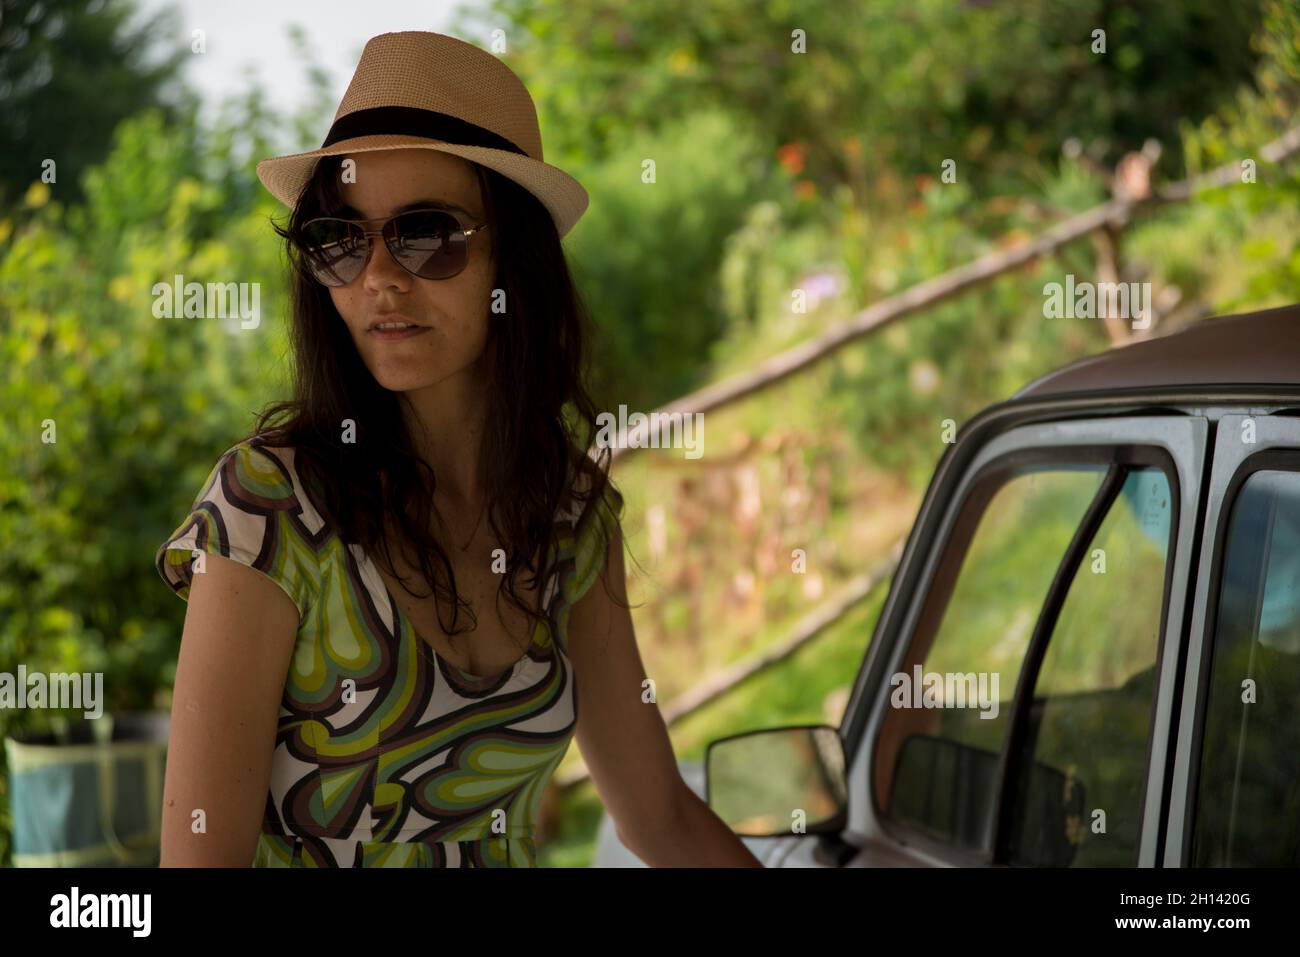 Woman with hat, sunglasses. She get in  the old car Stock Photo